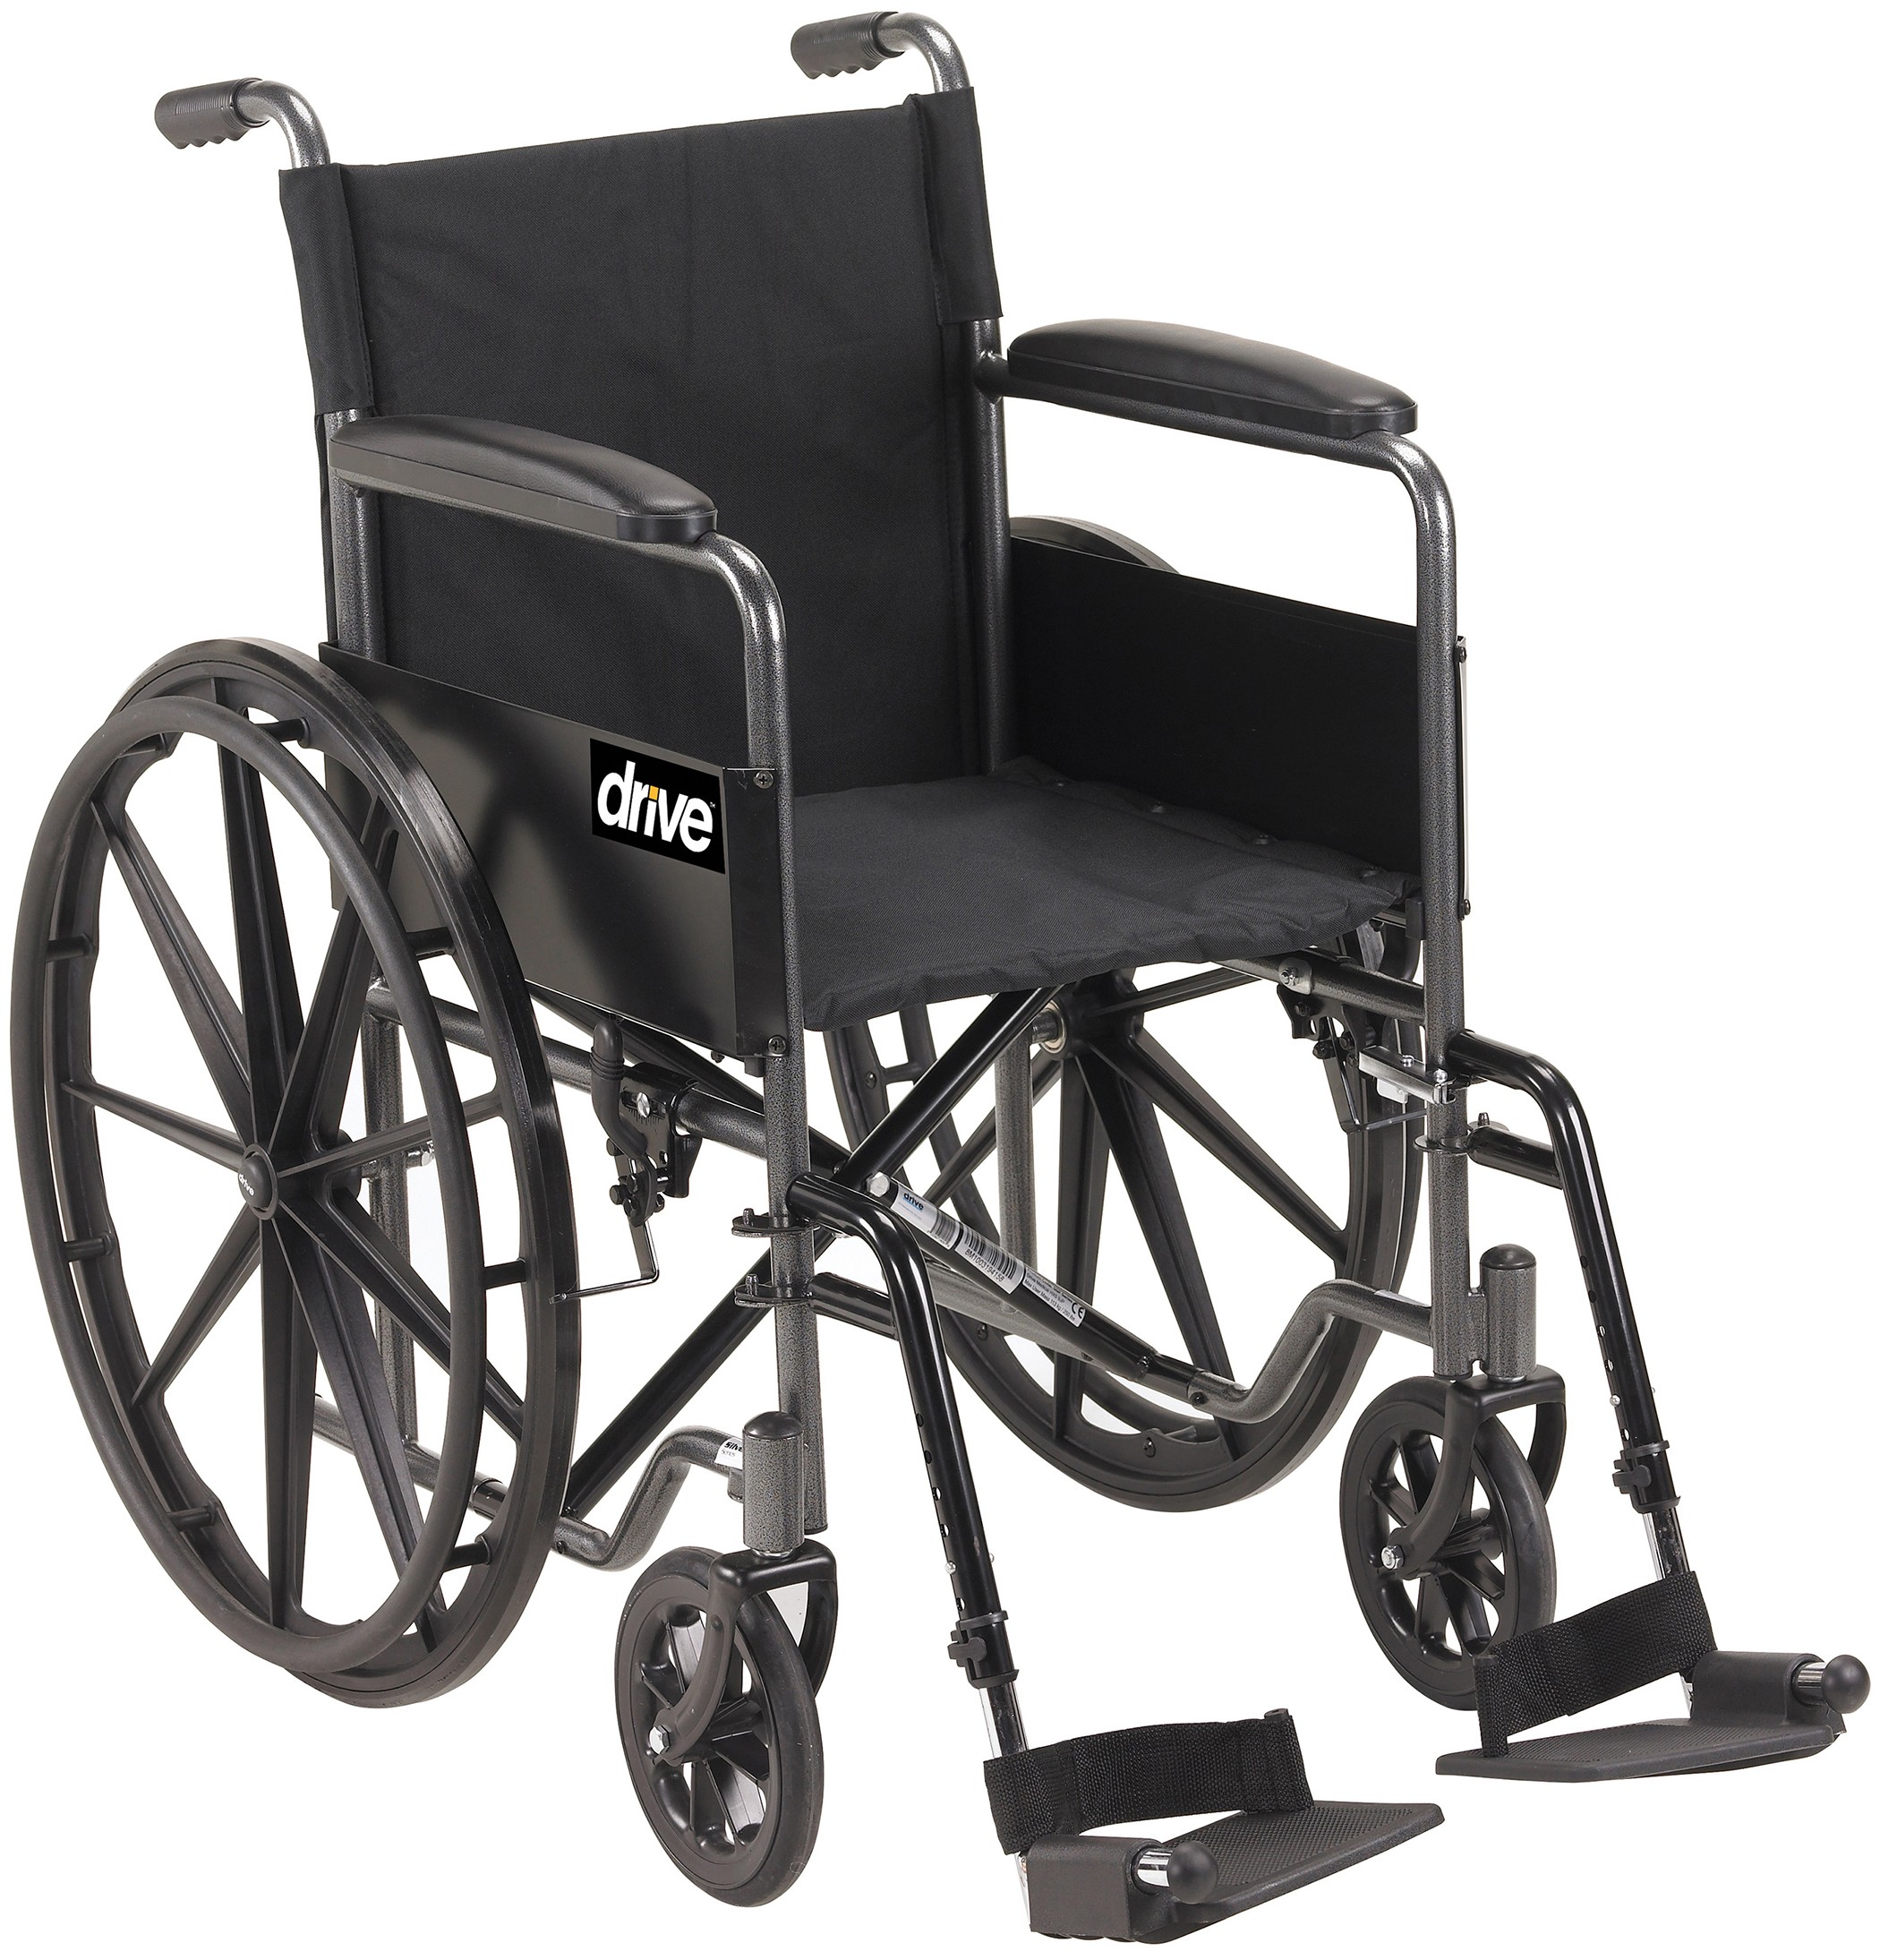 Wheelchair Rental Stores in Atlanta-Call Now for Same Day Delivery.